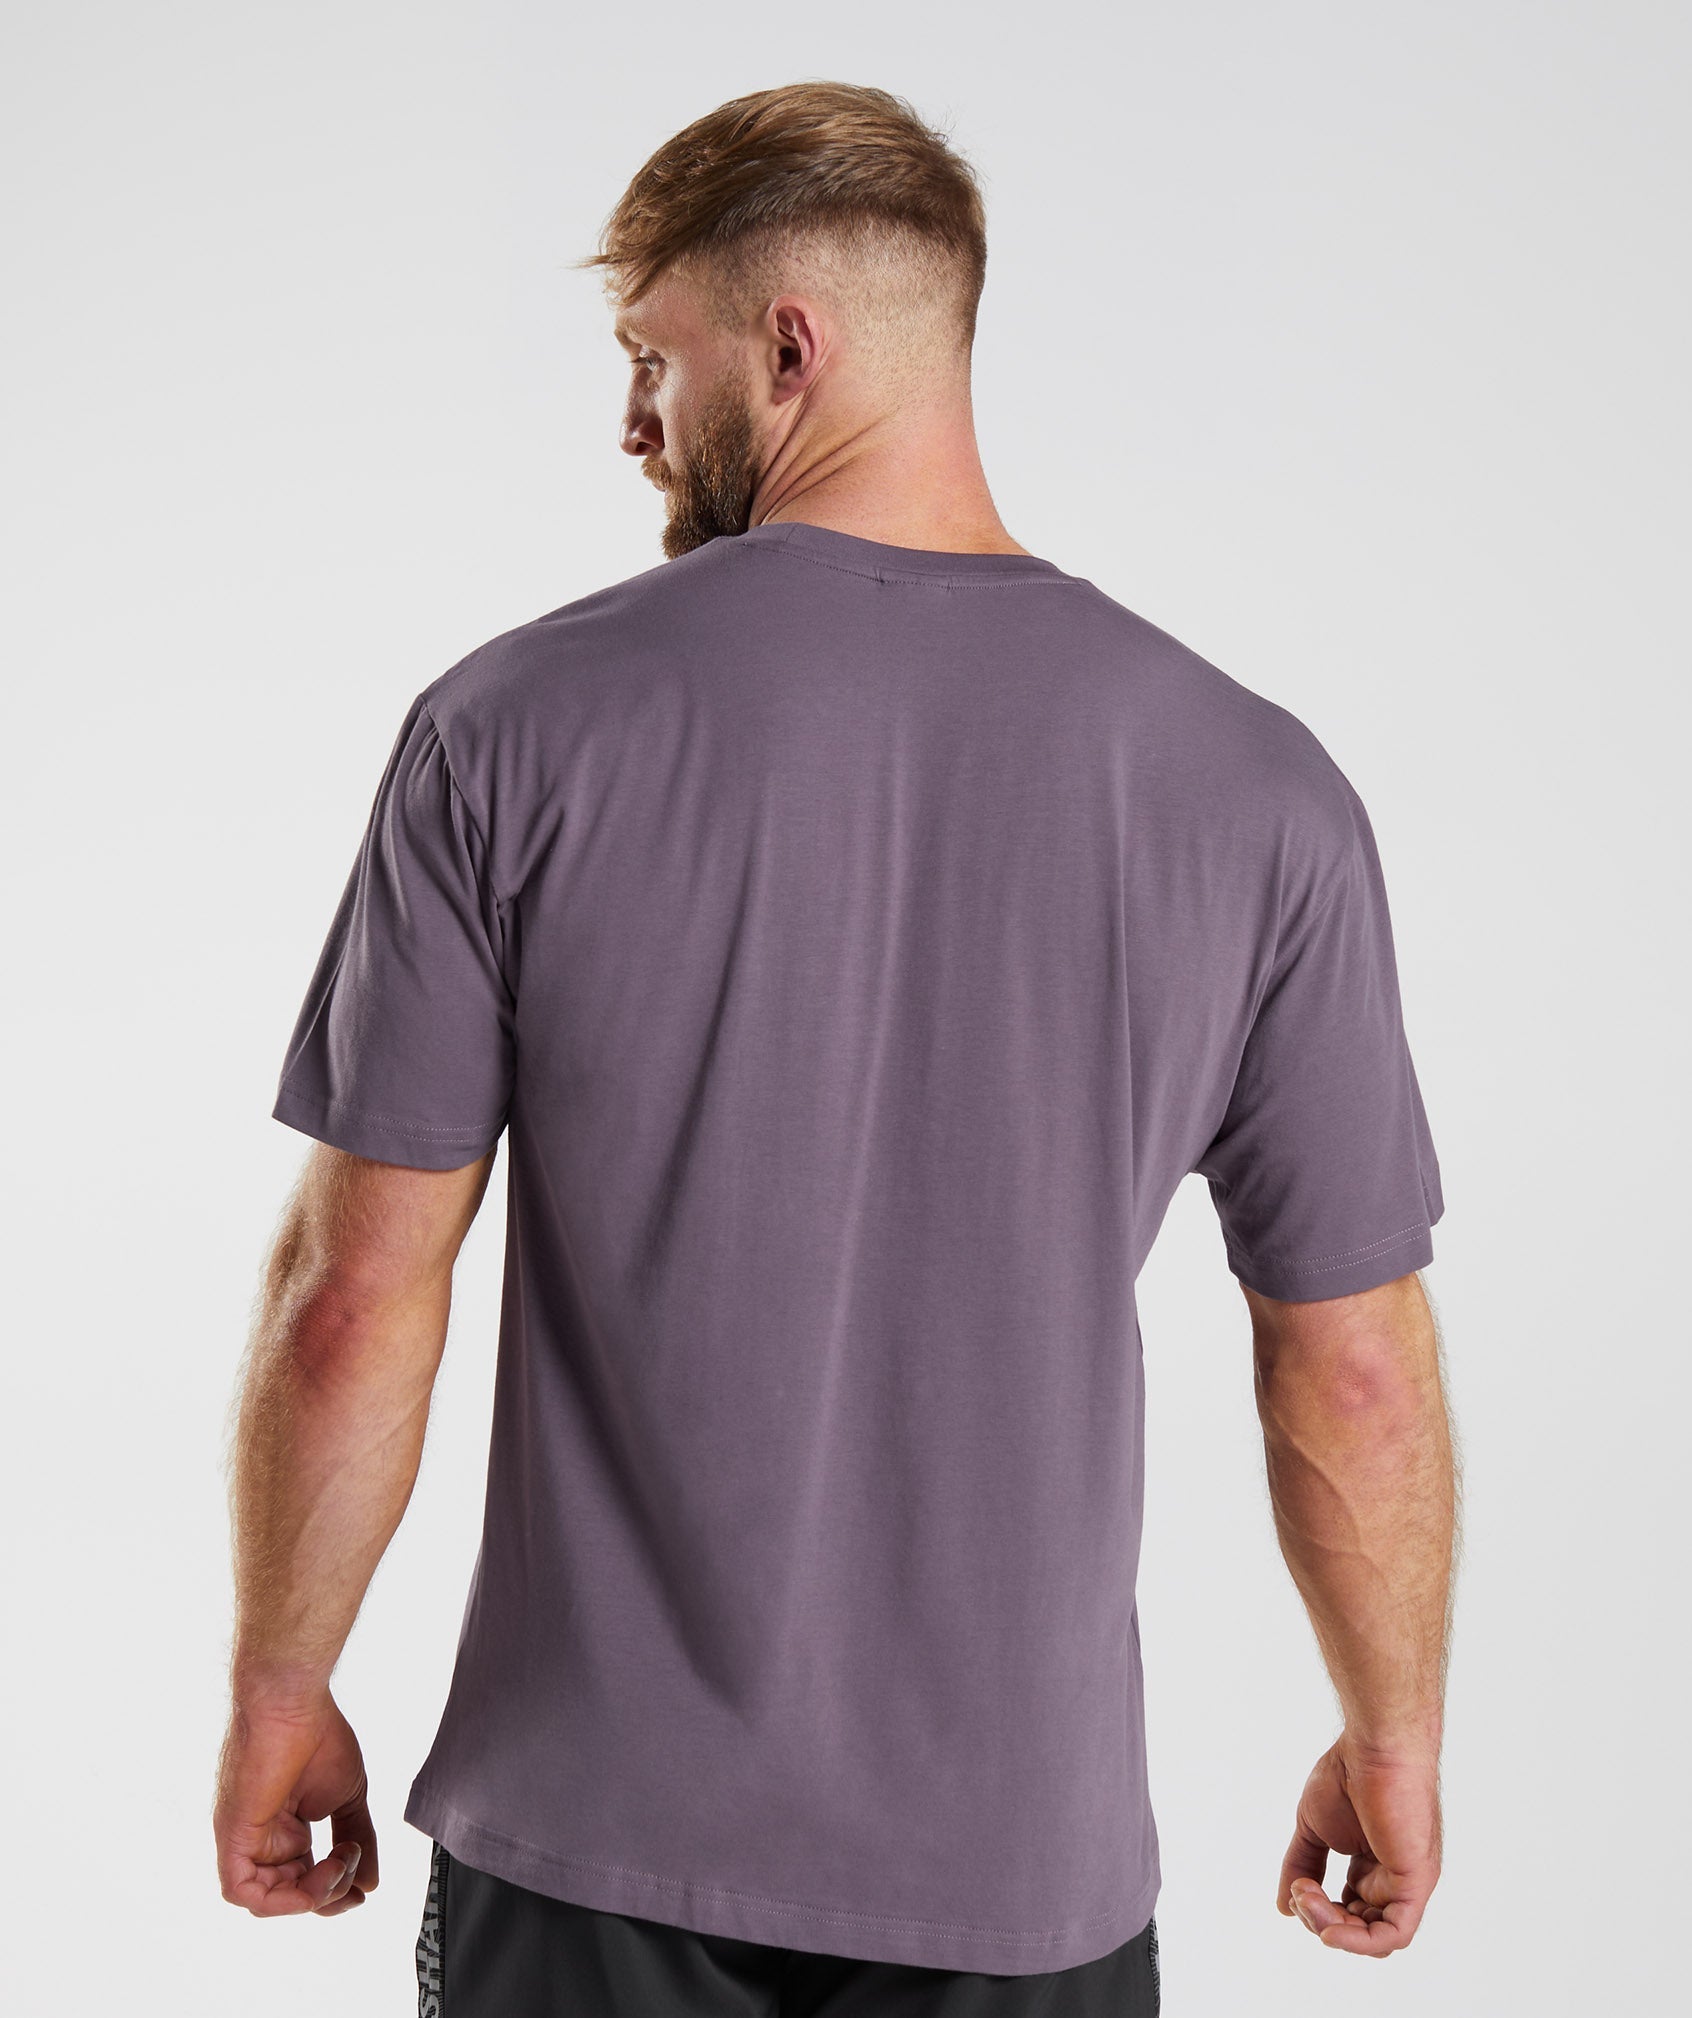 Apollo Oversized T-Shirt in Musk Lilac - view 2